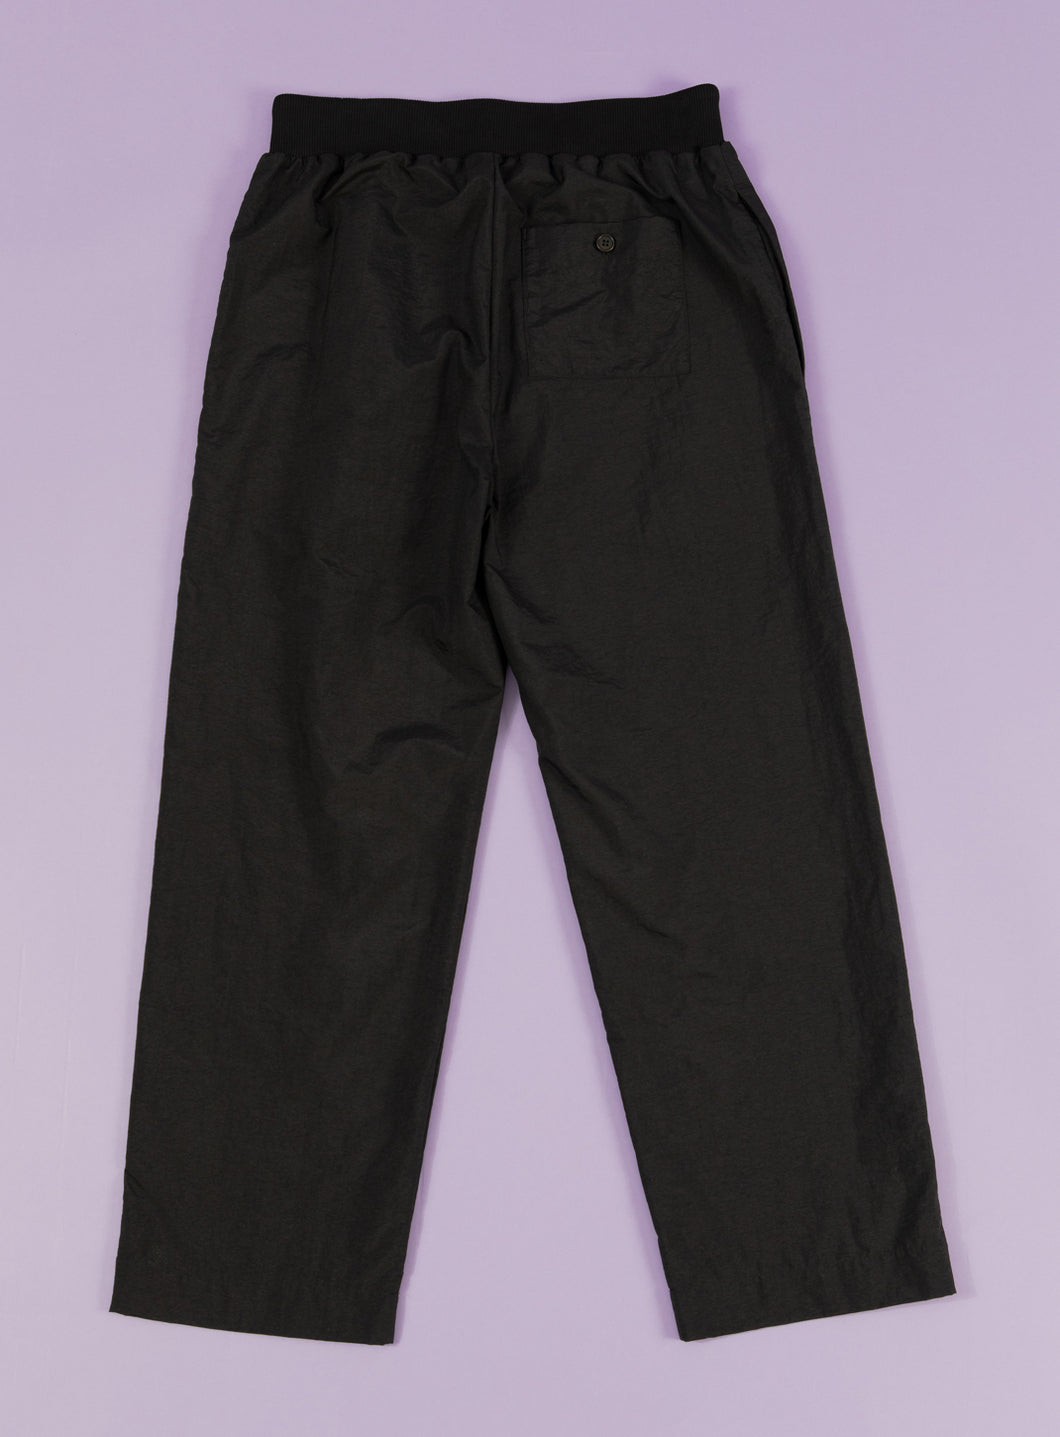 Ribbed Waist Baggy Pants in Navy Blue Tactel